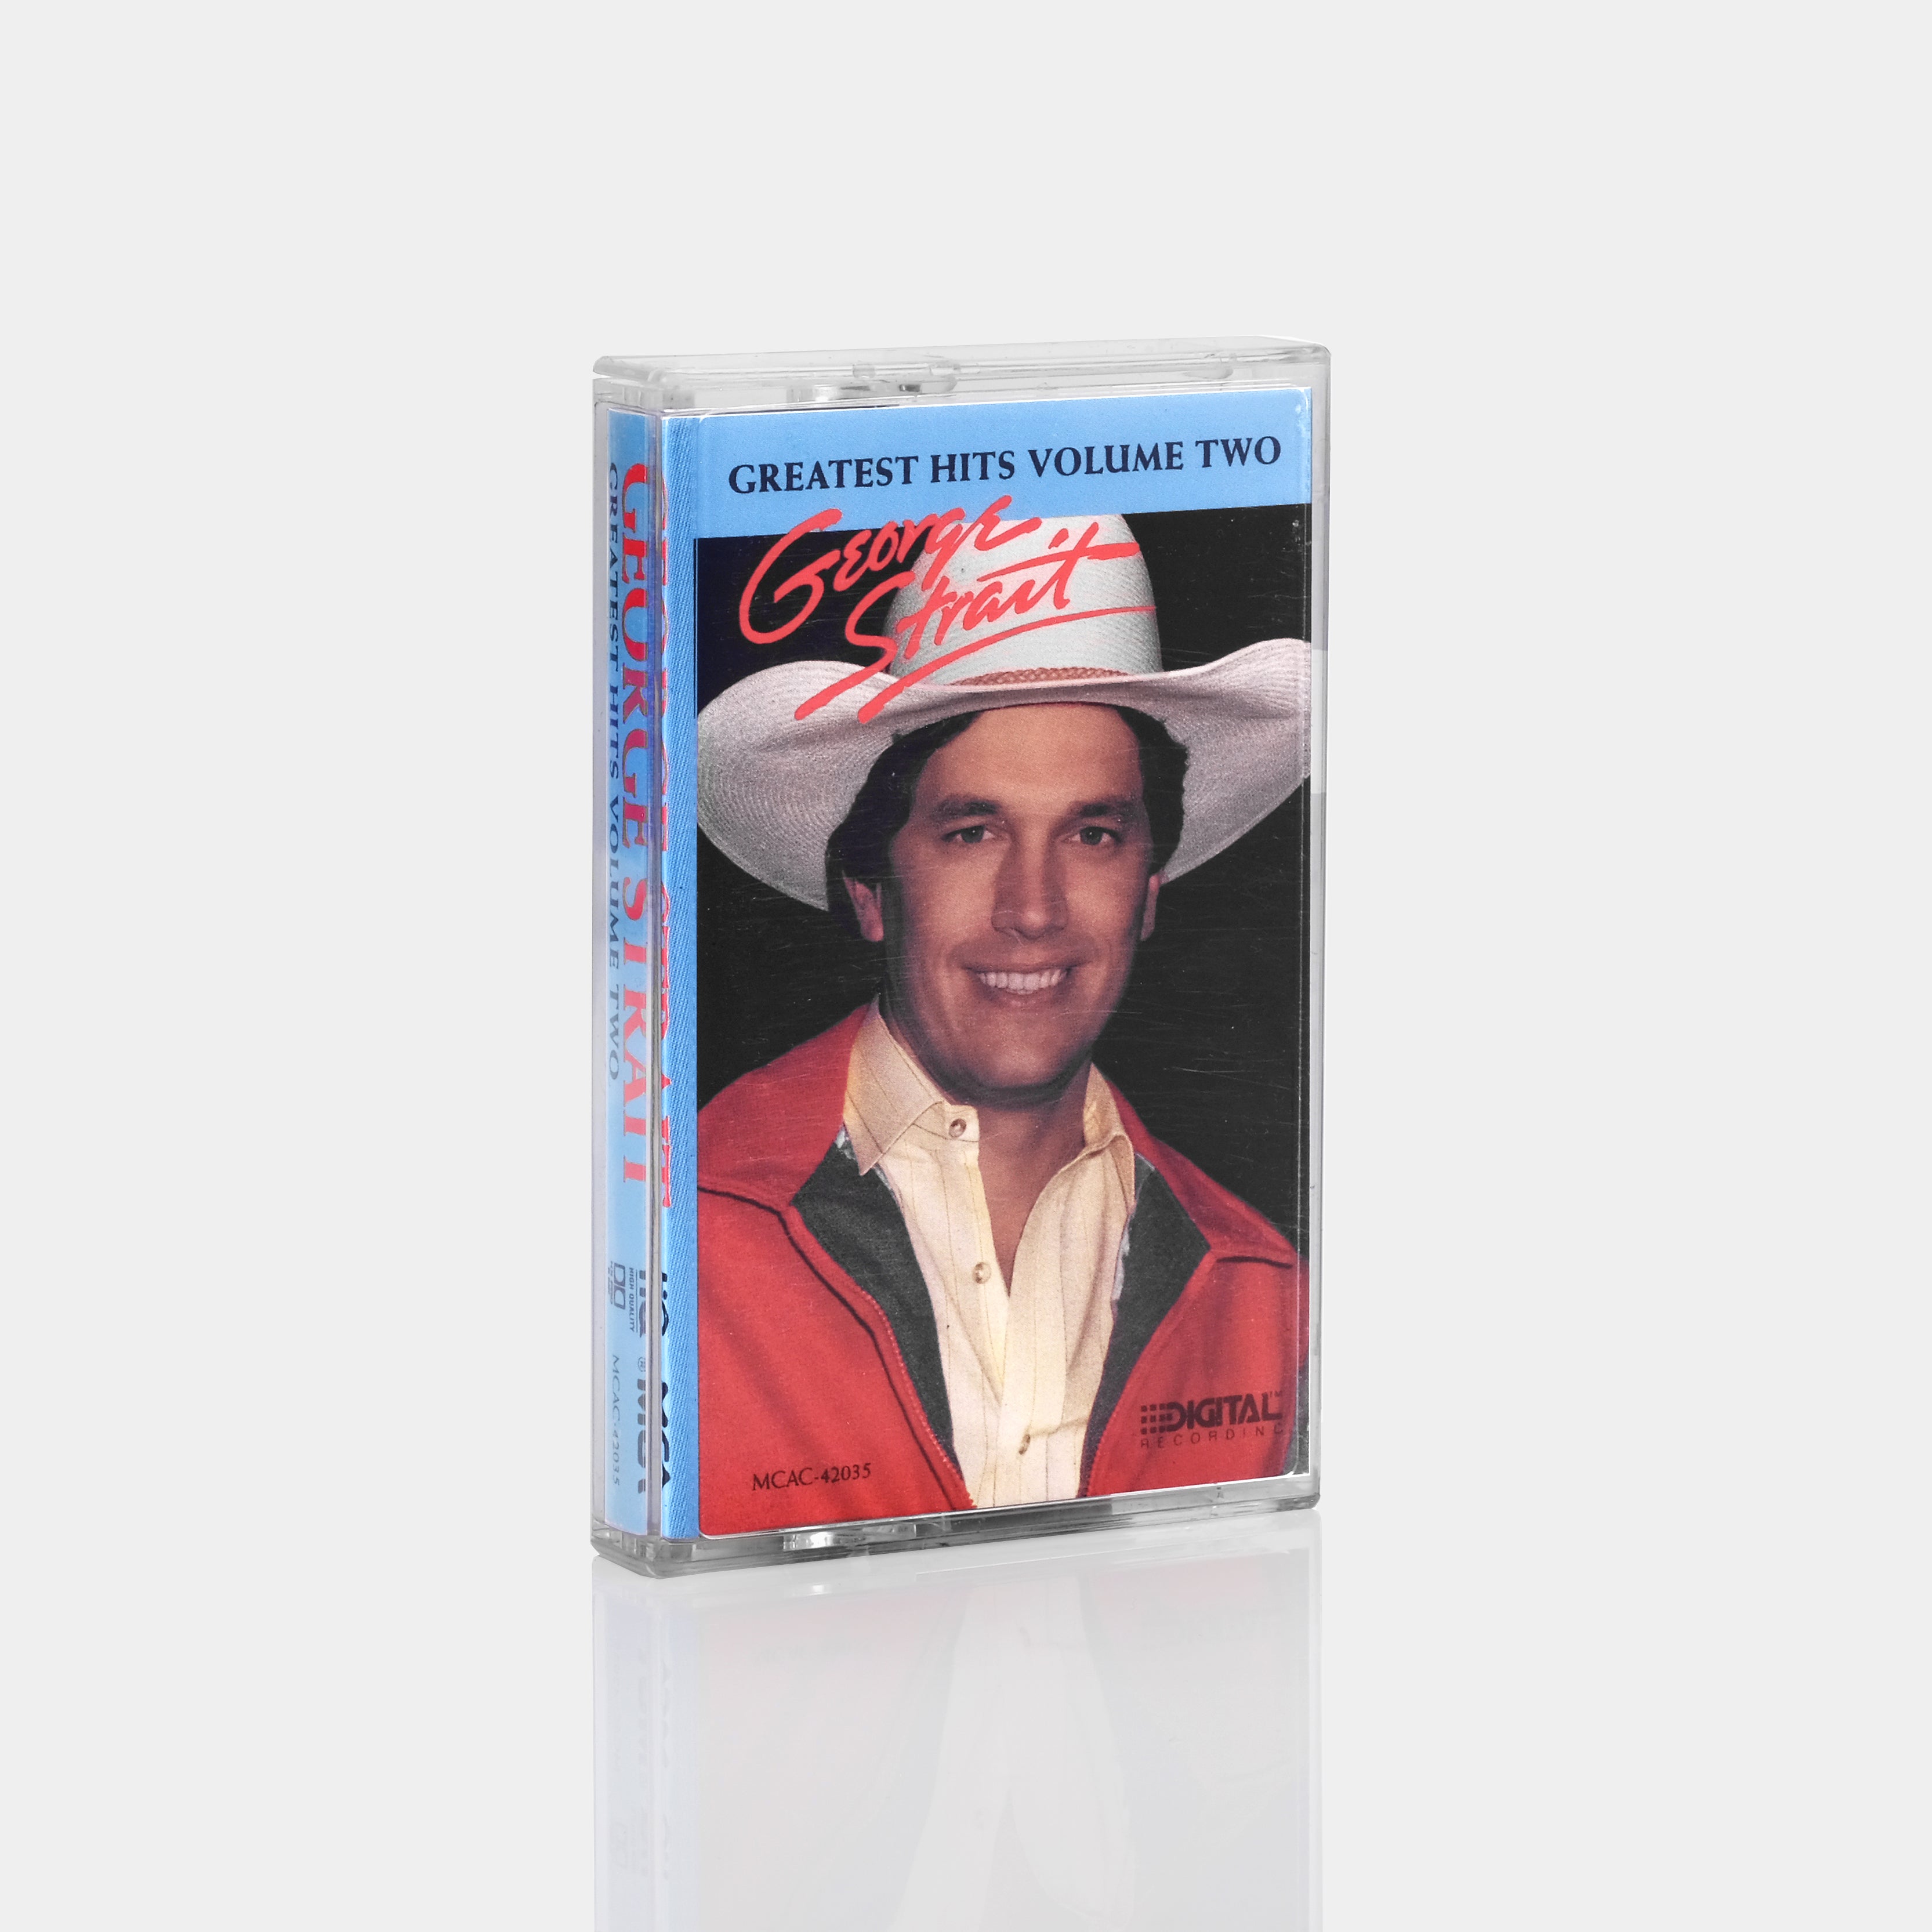 George Strait - Greatest Hits Volume Two Cassette Tape